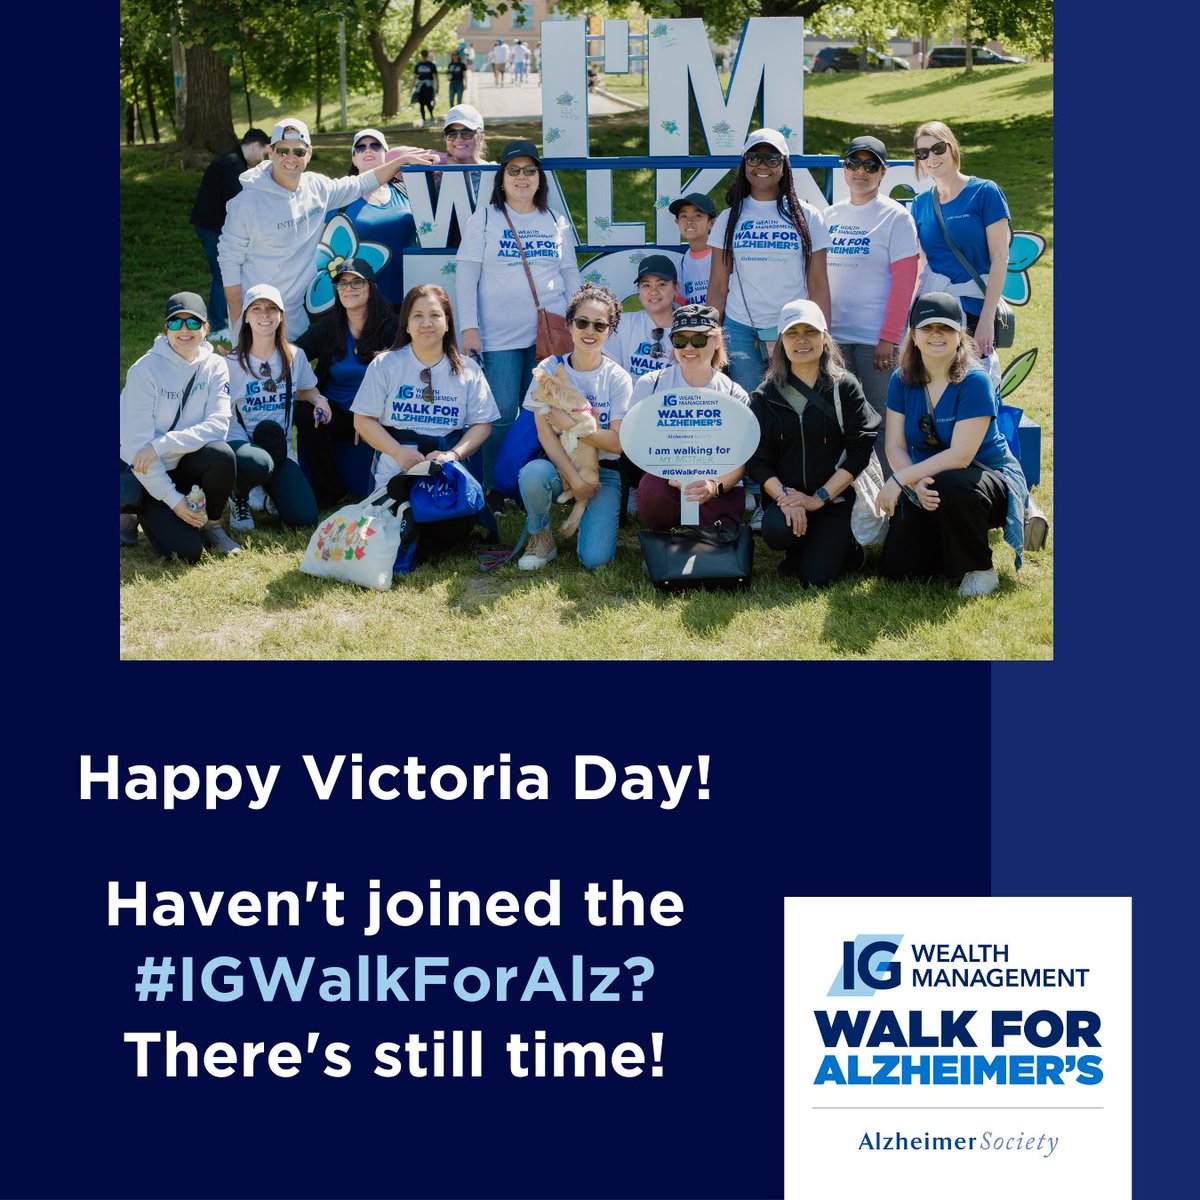 Happy #VictoriaDay! Haven't joined the #IGWalkForAlz? There's still time! Happening May 25th at Memorial Park in Bracebridge, and May 26th at River Mill Park in Huntsville, or join virtually on your own time.⁠ 

Register and donate now: bit.ly/4a8YSBP